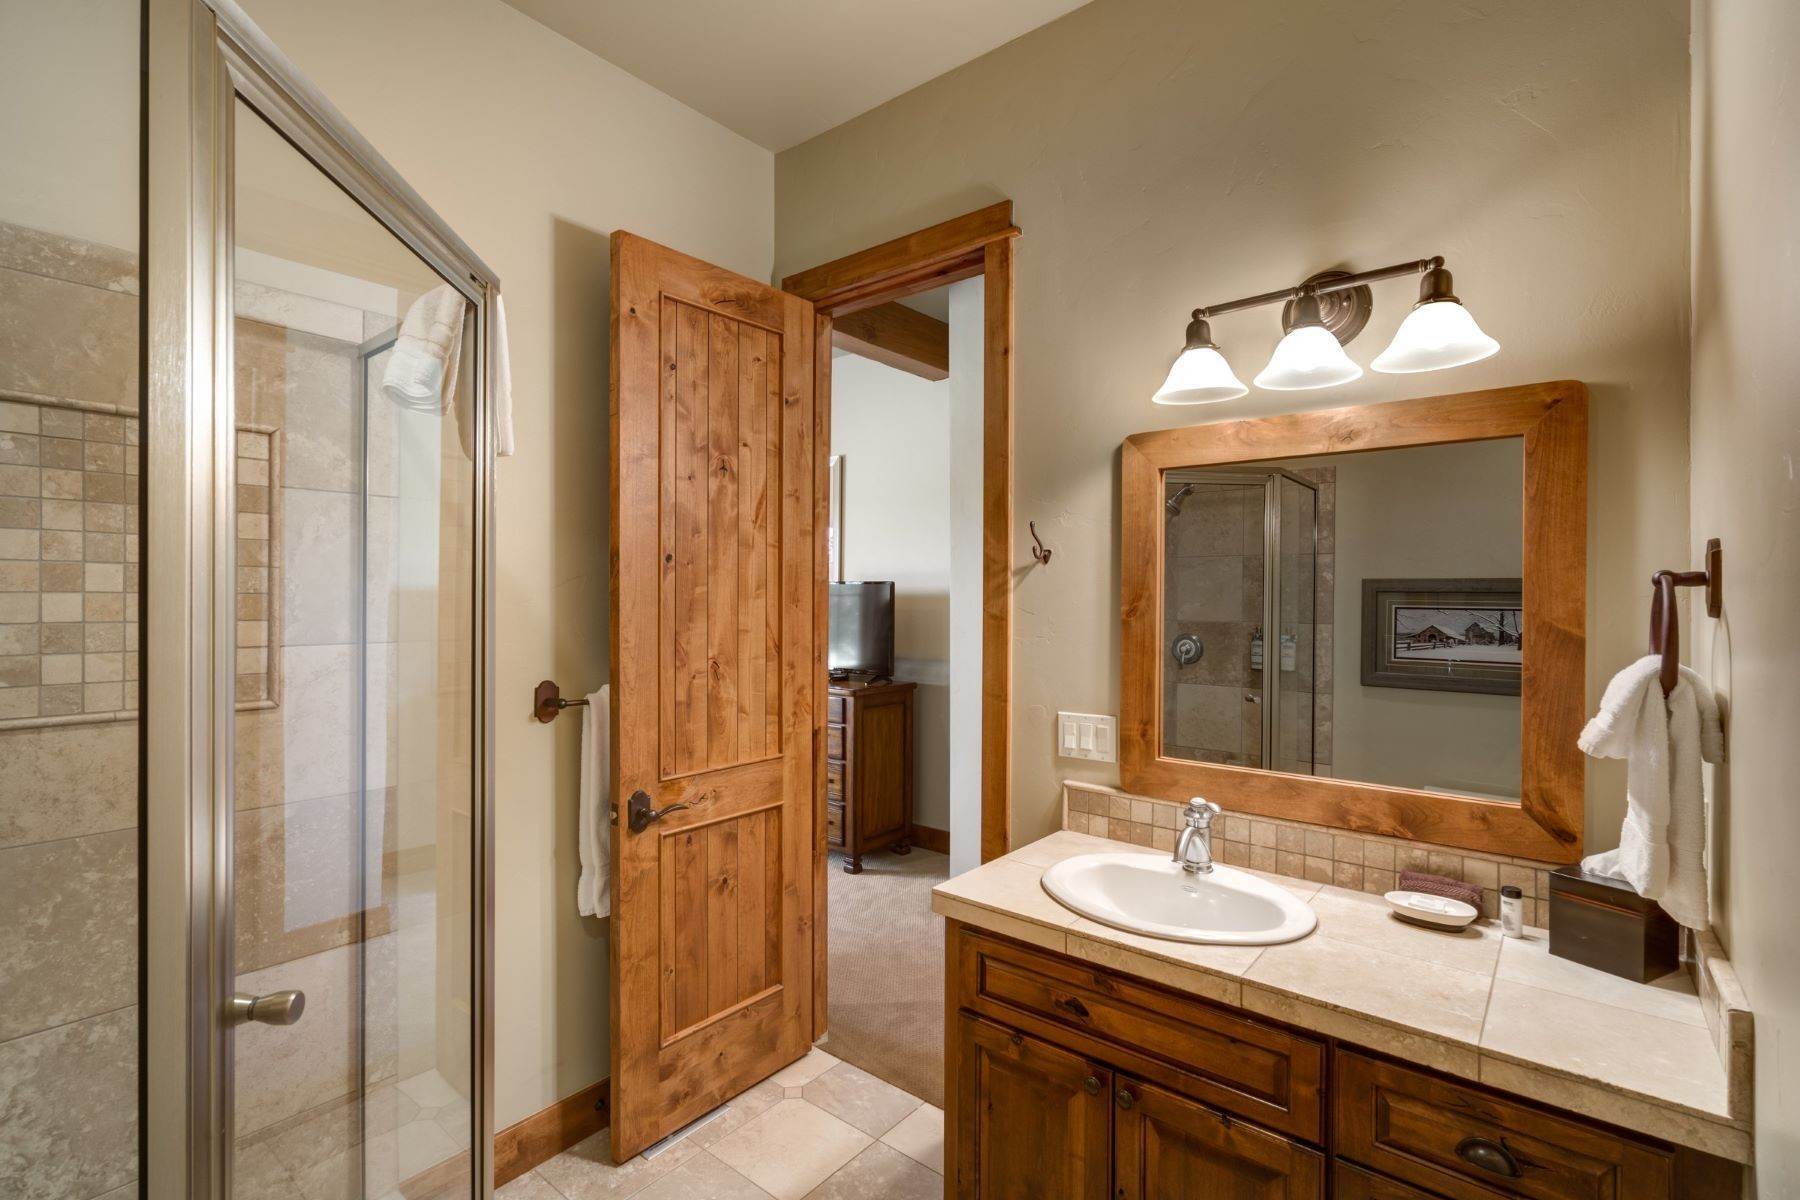 11. Fractional Ownership Property for Sale at 1331 Turning Leaf Court, Steamboat Springs, CO, 80487 1331 Turning Leaf Court Steamboat Springs, Colorado 80487 United States